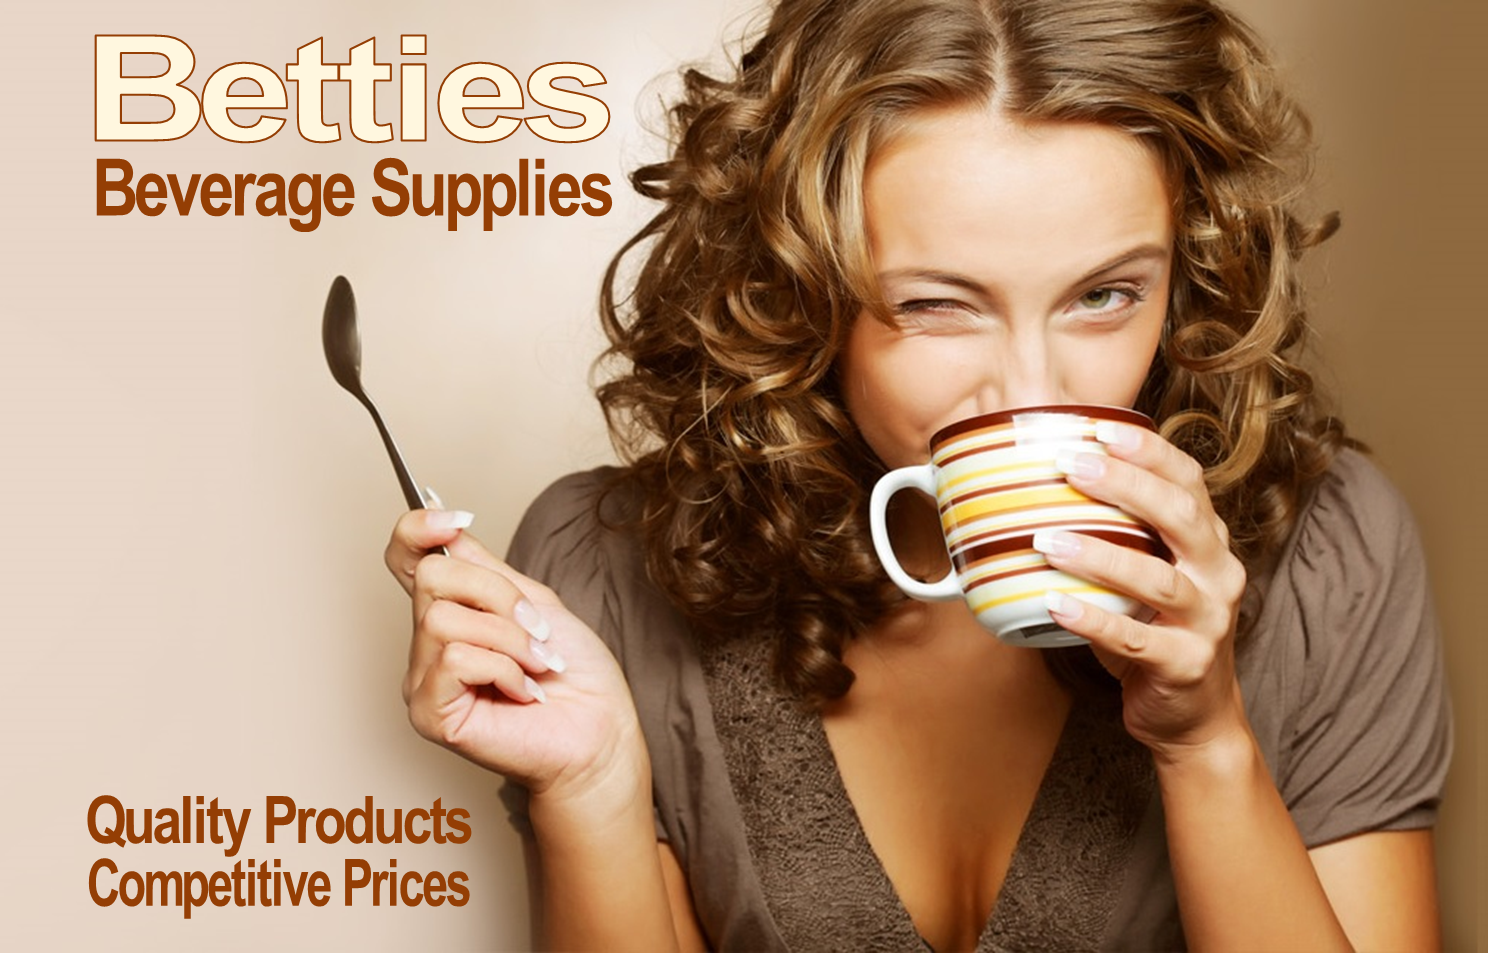 Local Deals in Worcestershire on Teas, coffees and other beverages with Betties Beverages